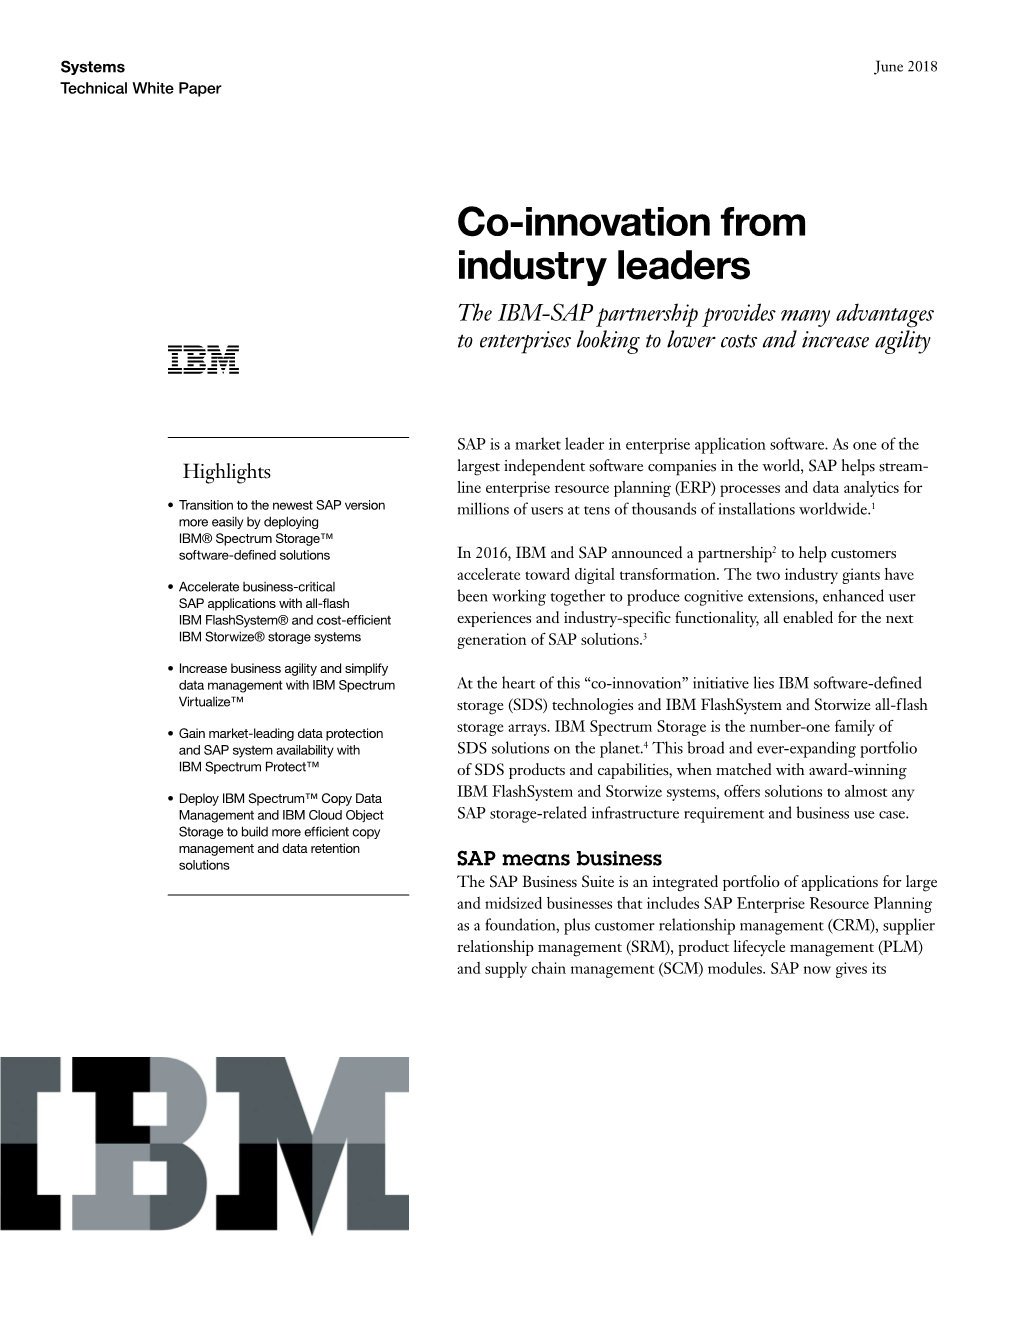 Co-Innovation from Industry Leaders the IBM-SAP Partnership Provides Many Advantages to Enterprises Looking to Lower Costs and Increase Agility